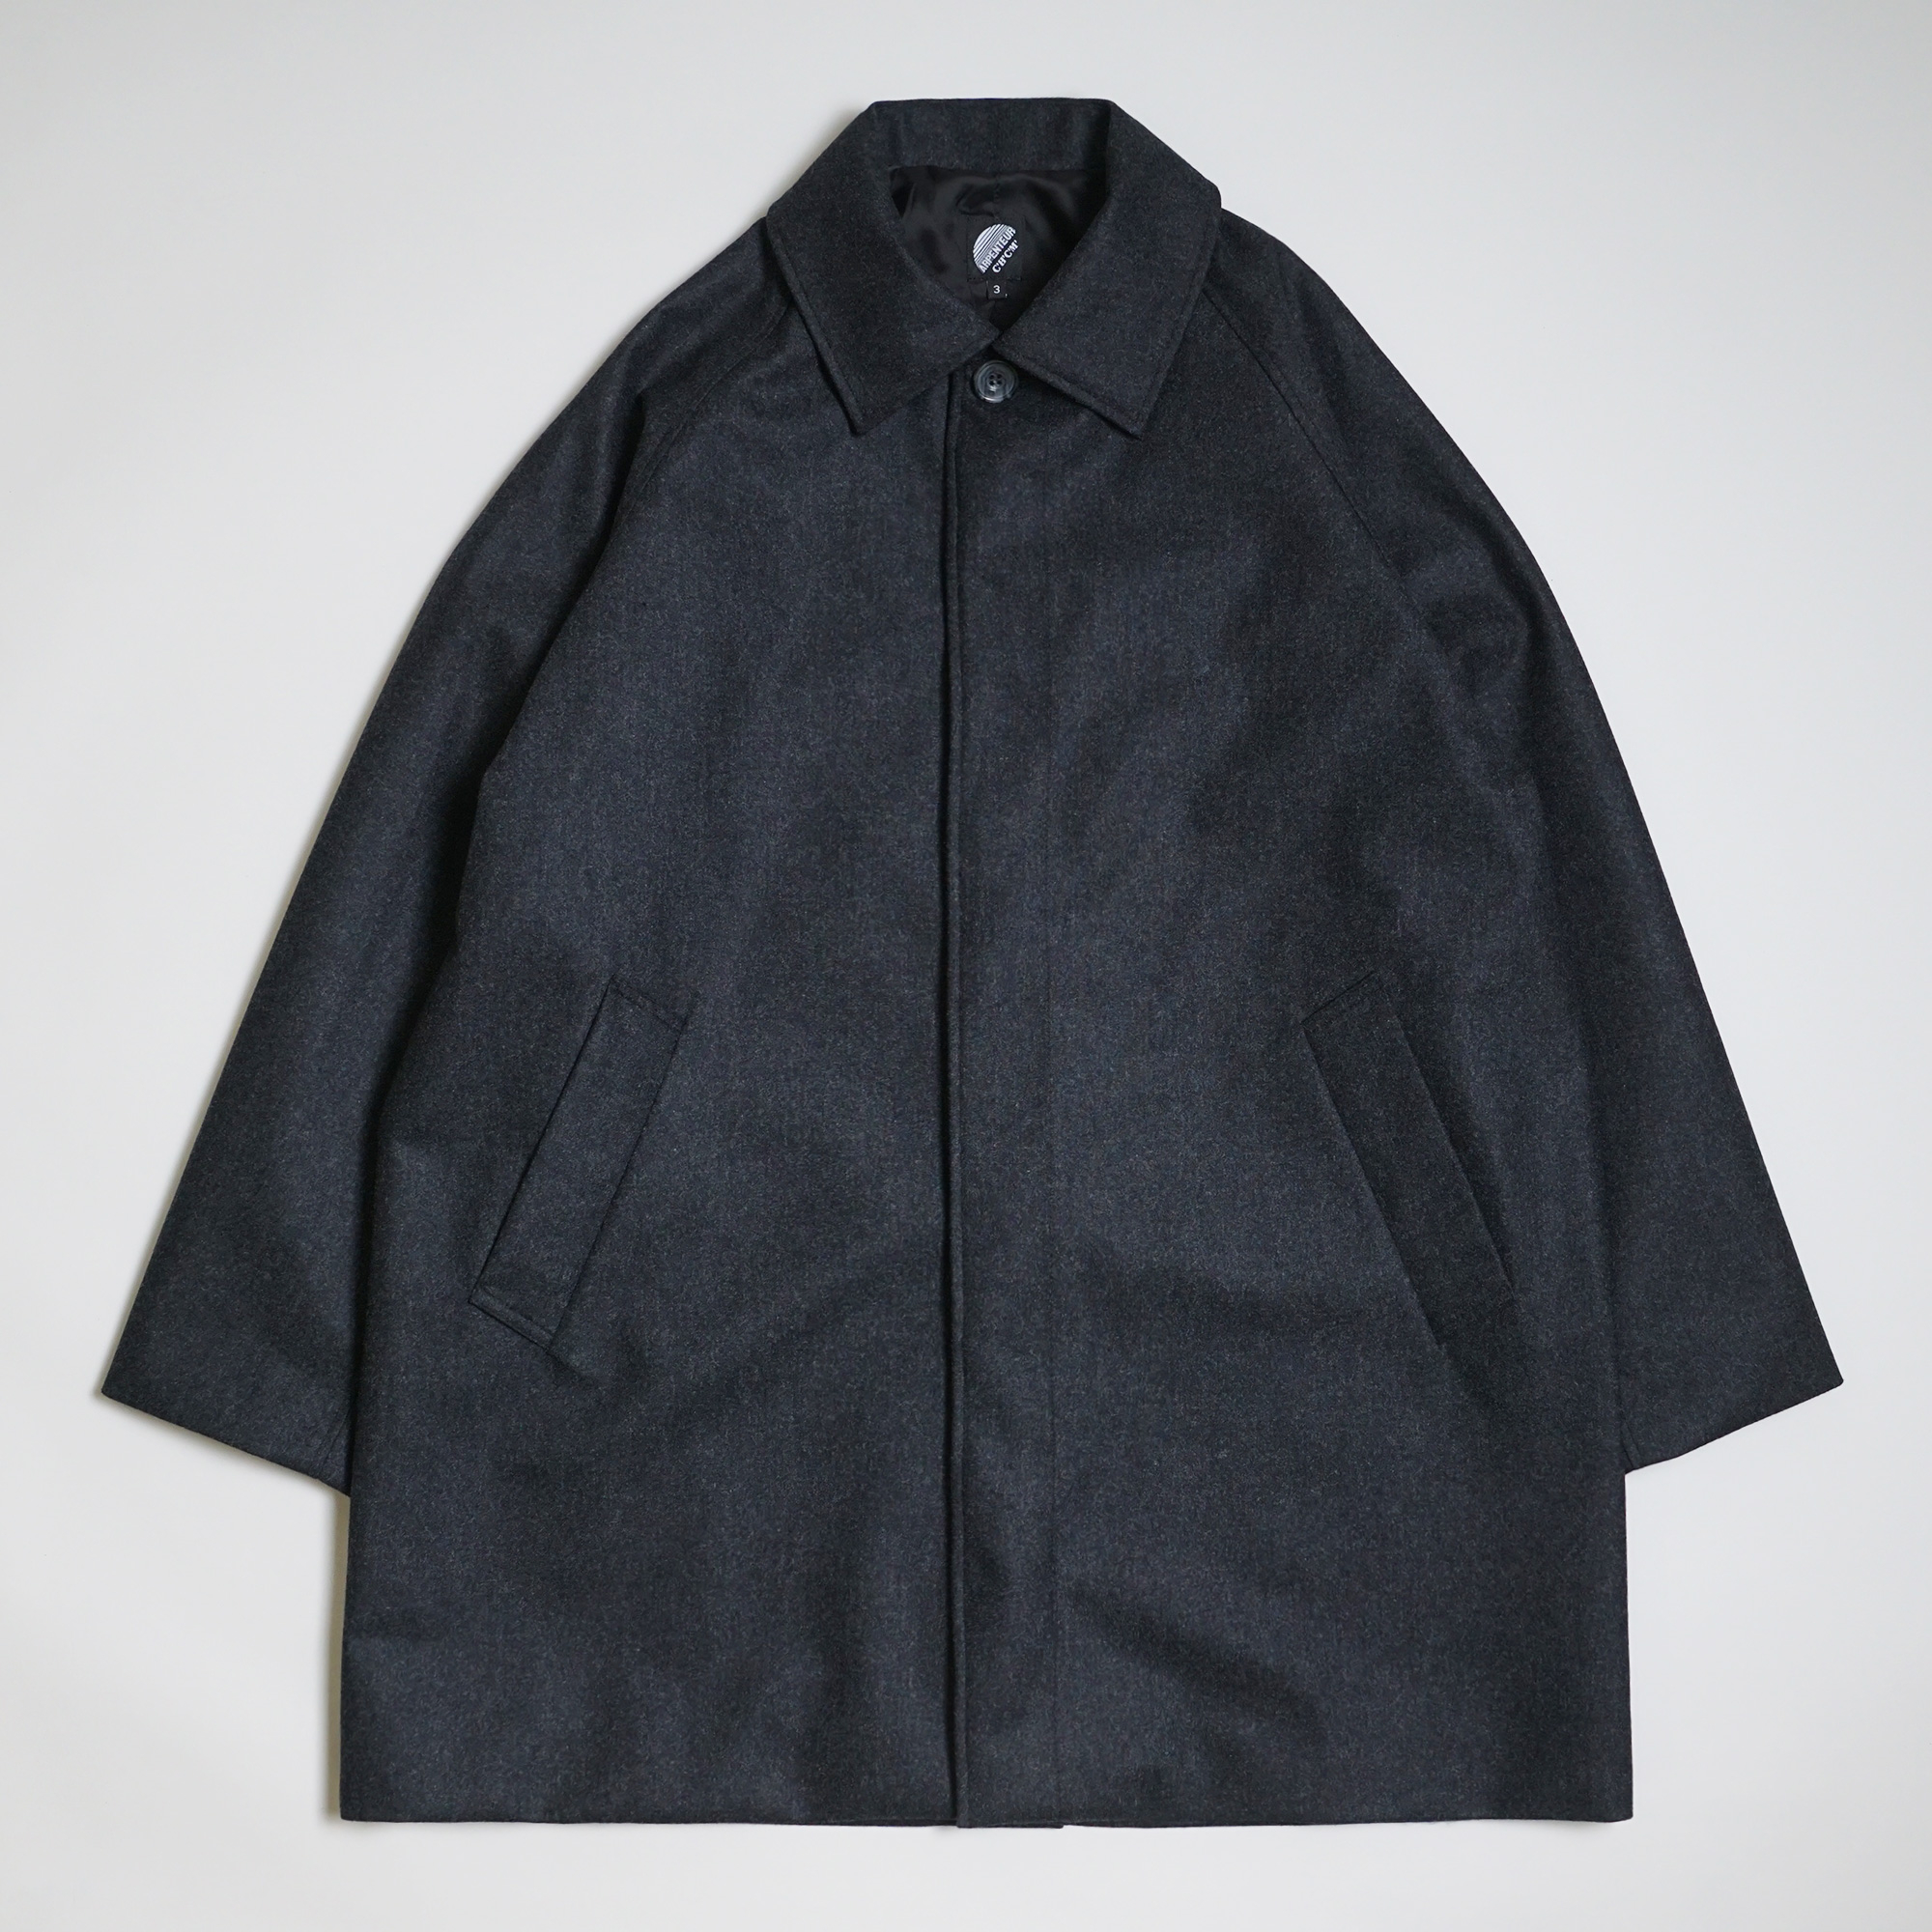 Night Coat in Charcoal color by Arpenteur for C'H'C'M'